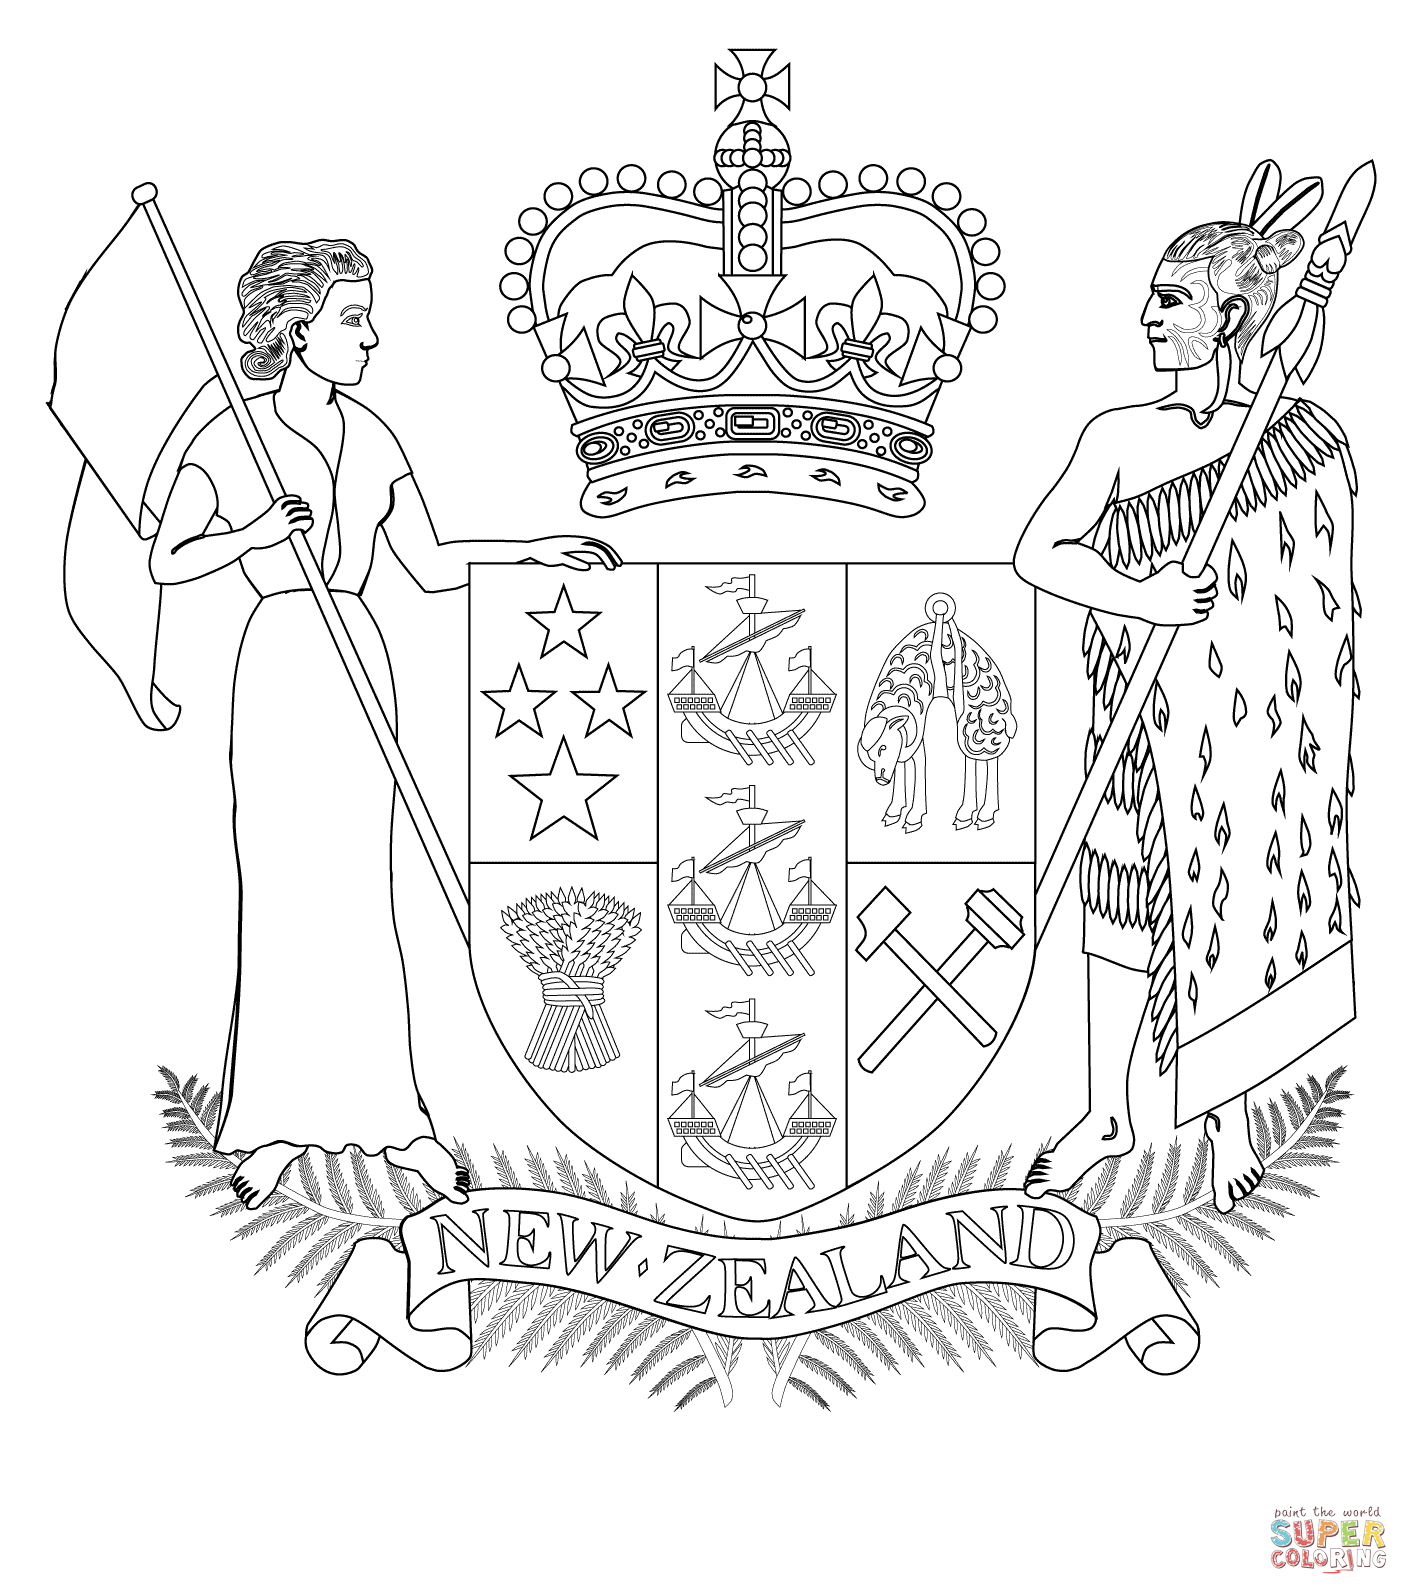 New Zealand coloring pages | Free Coloring Pages